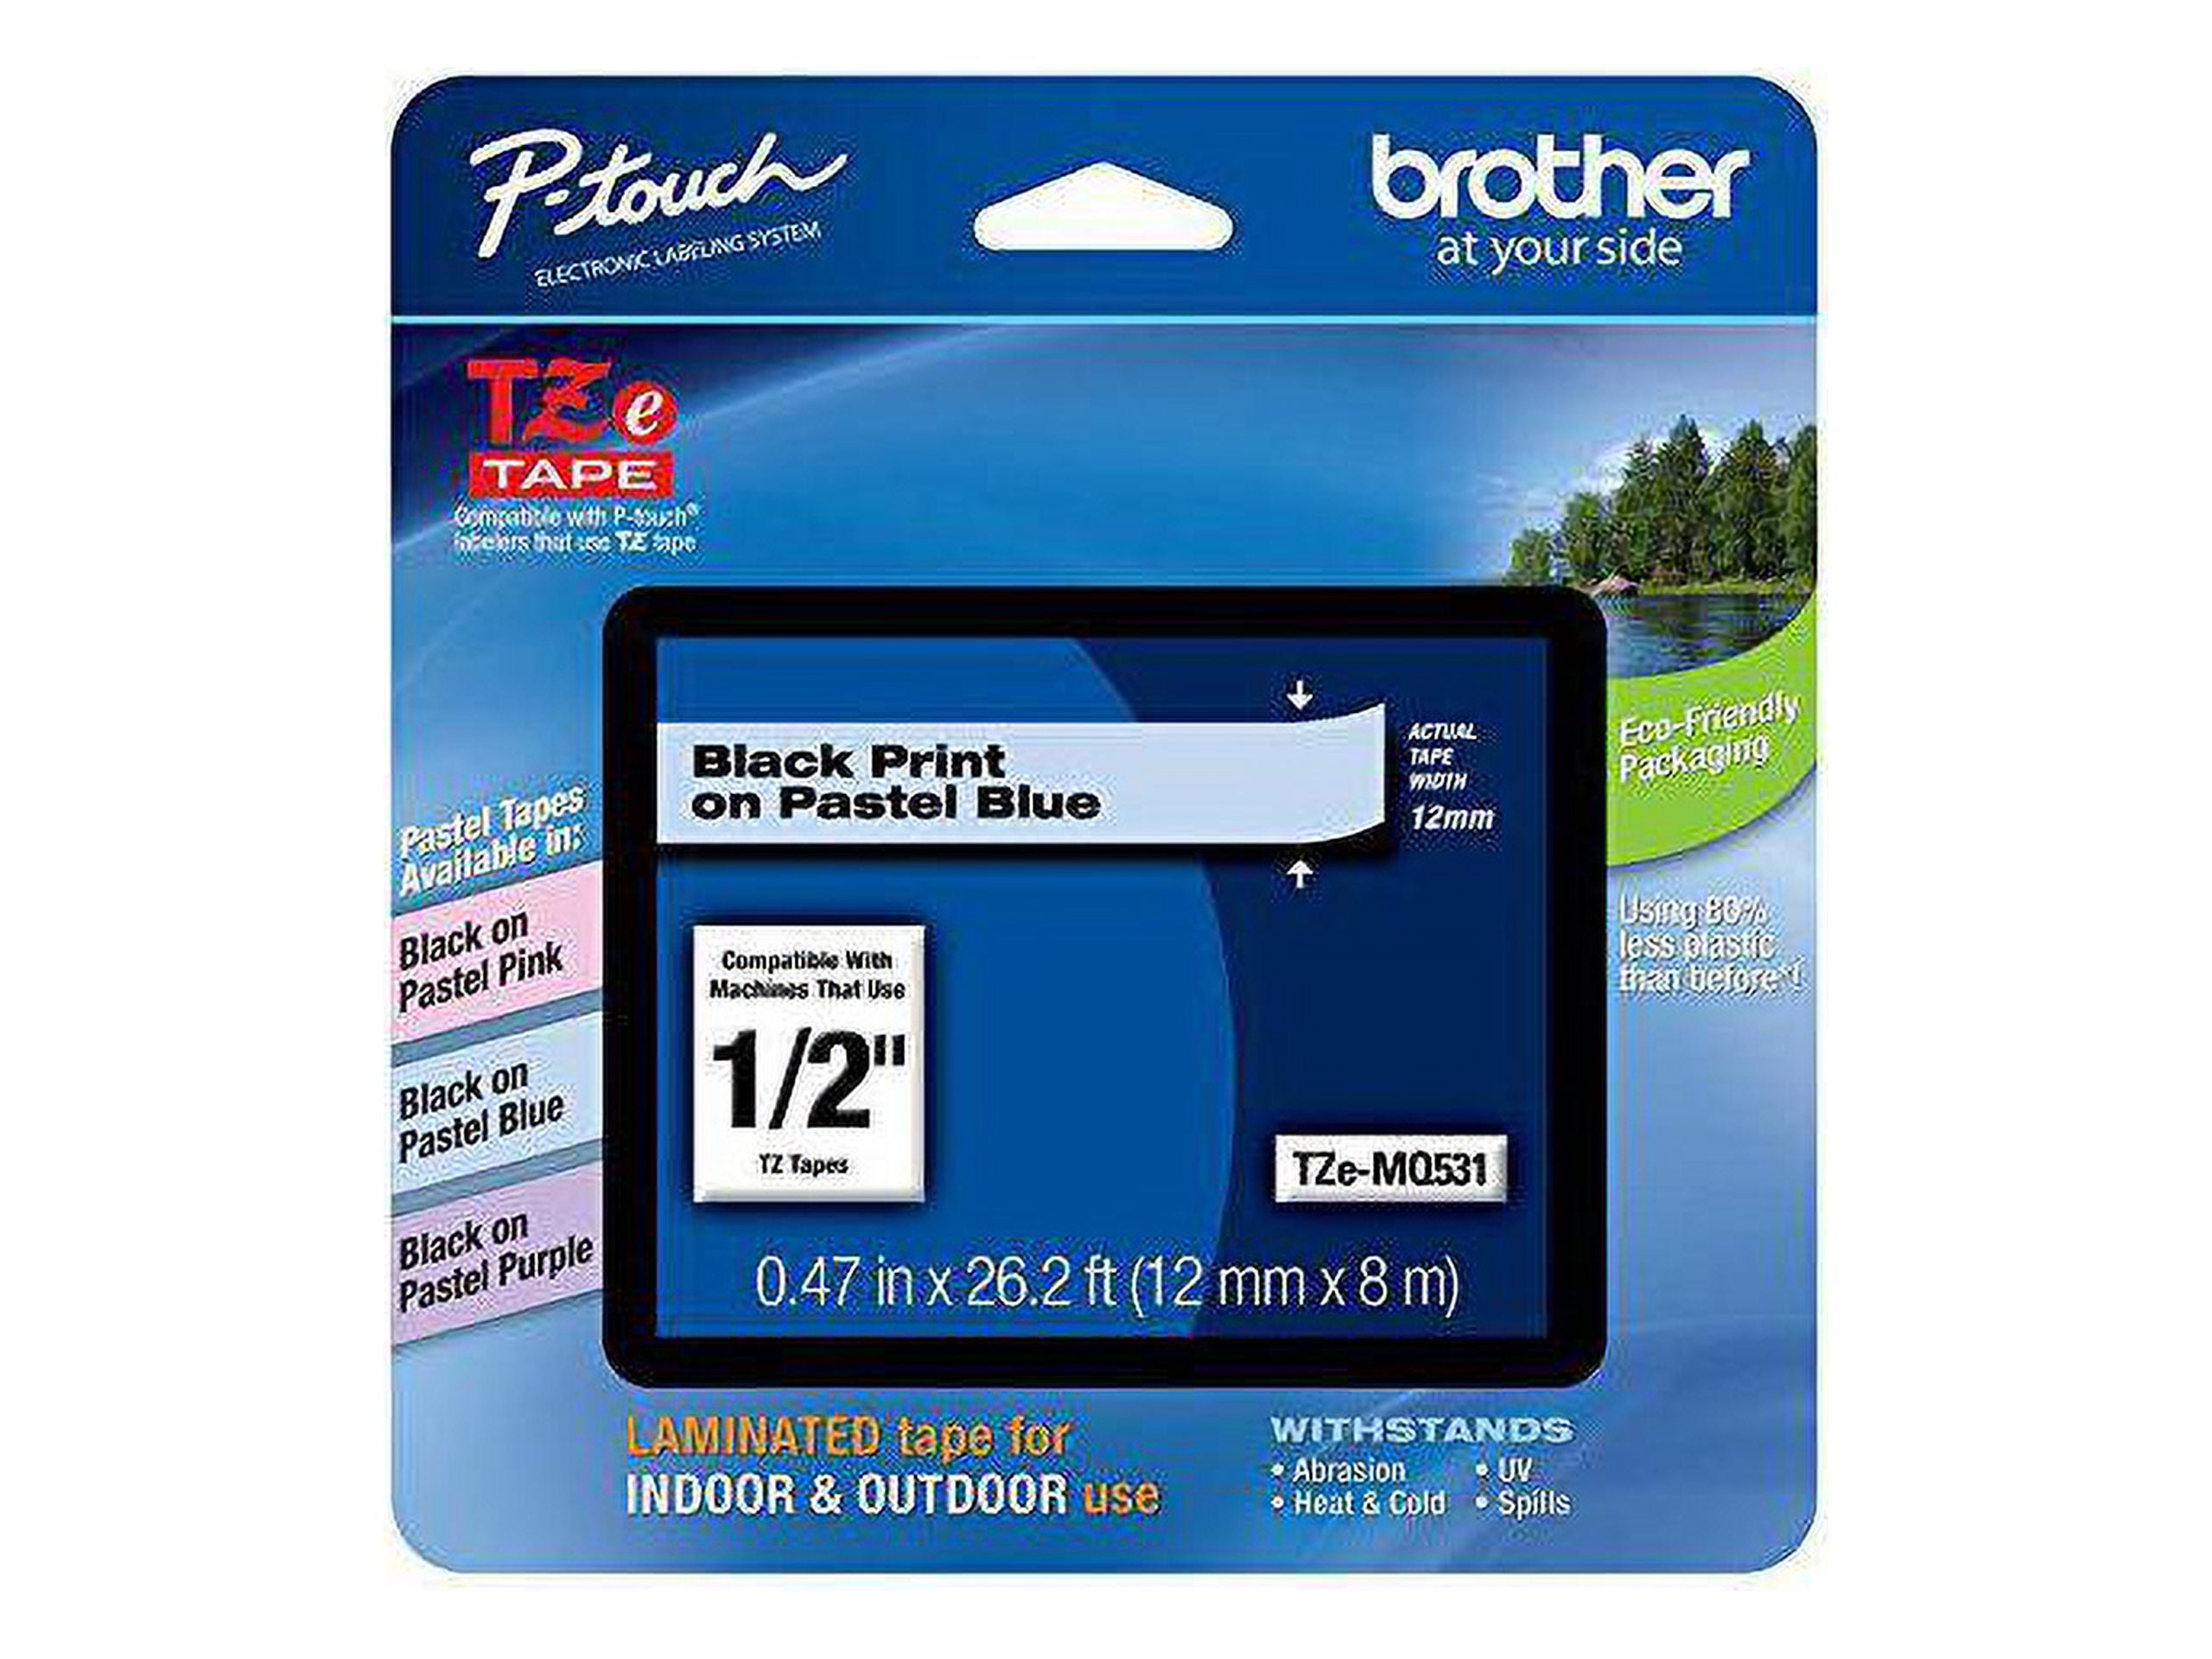 Brother P-Touch M Series Tape Cartridge, 1/2W, Blue on White